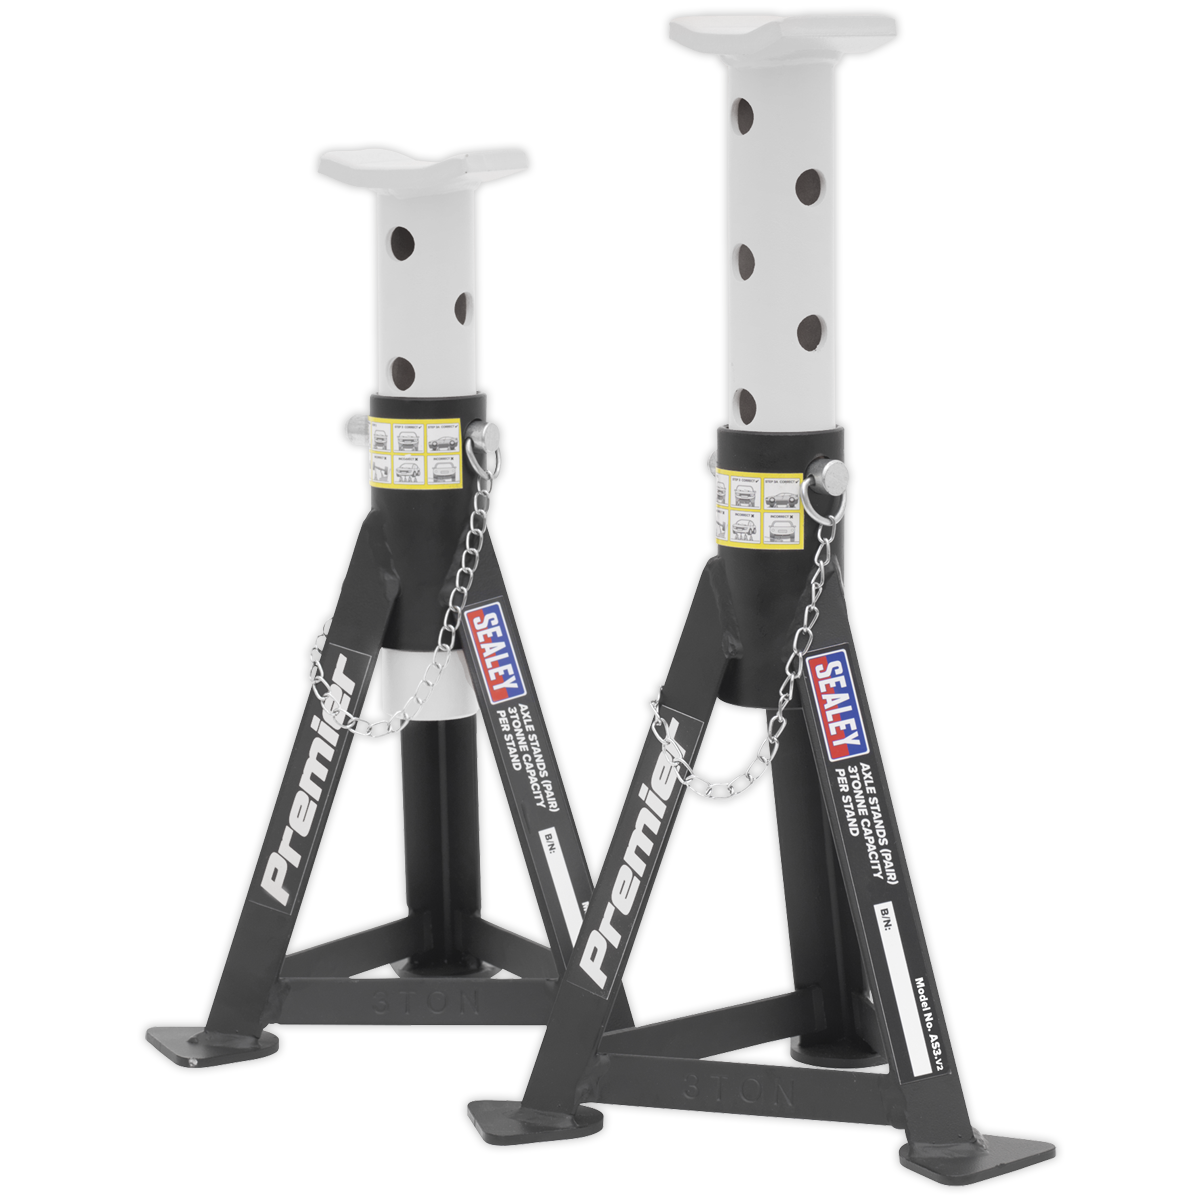 Sealey 3 tonne axle stands